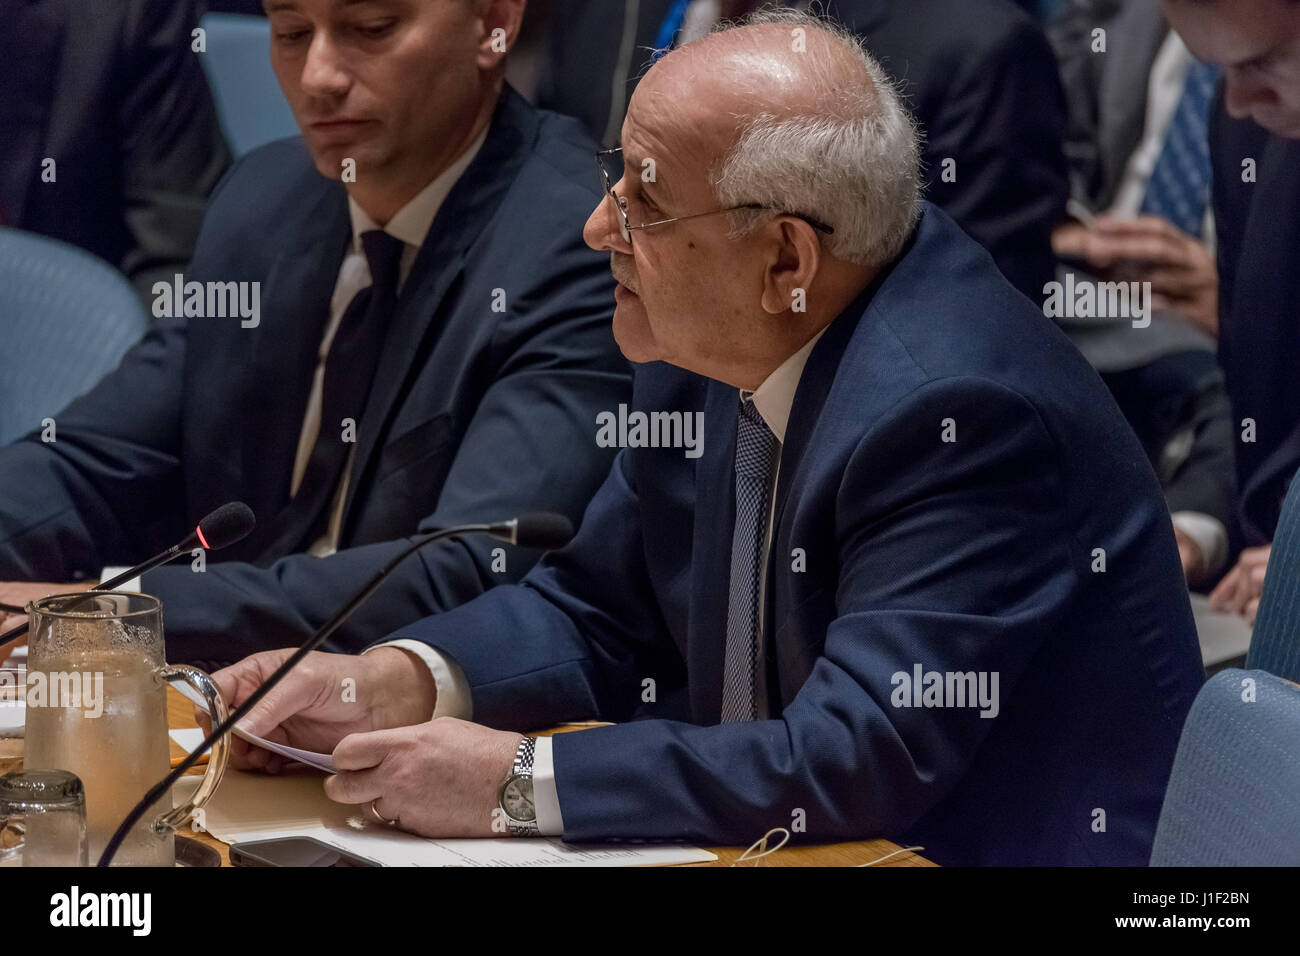 New York, USA. 20th Apr, 2017. Palestinian Permanent Observer to the UN Ambassador Riyad Mansour is seen addressing the Council. The United Nations Security Council convened an open debate on the 'the situation in the Middle East, including the Palestinian question.” At the debate preside over by US Ambassador to the UN Nikki Haley, Council members heard a briefing from Nikolay Mladenov, the UN Special Coordinator for the Middle East Peace Process. Though monthly meetings on Palestine are a standard item in the Council's programme, upon assuming Presidency of the Council at the beginning of Ma Stock Photo